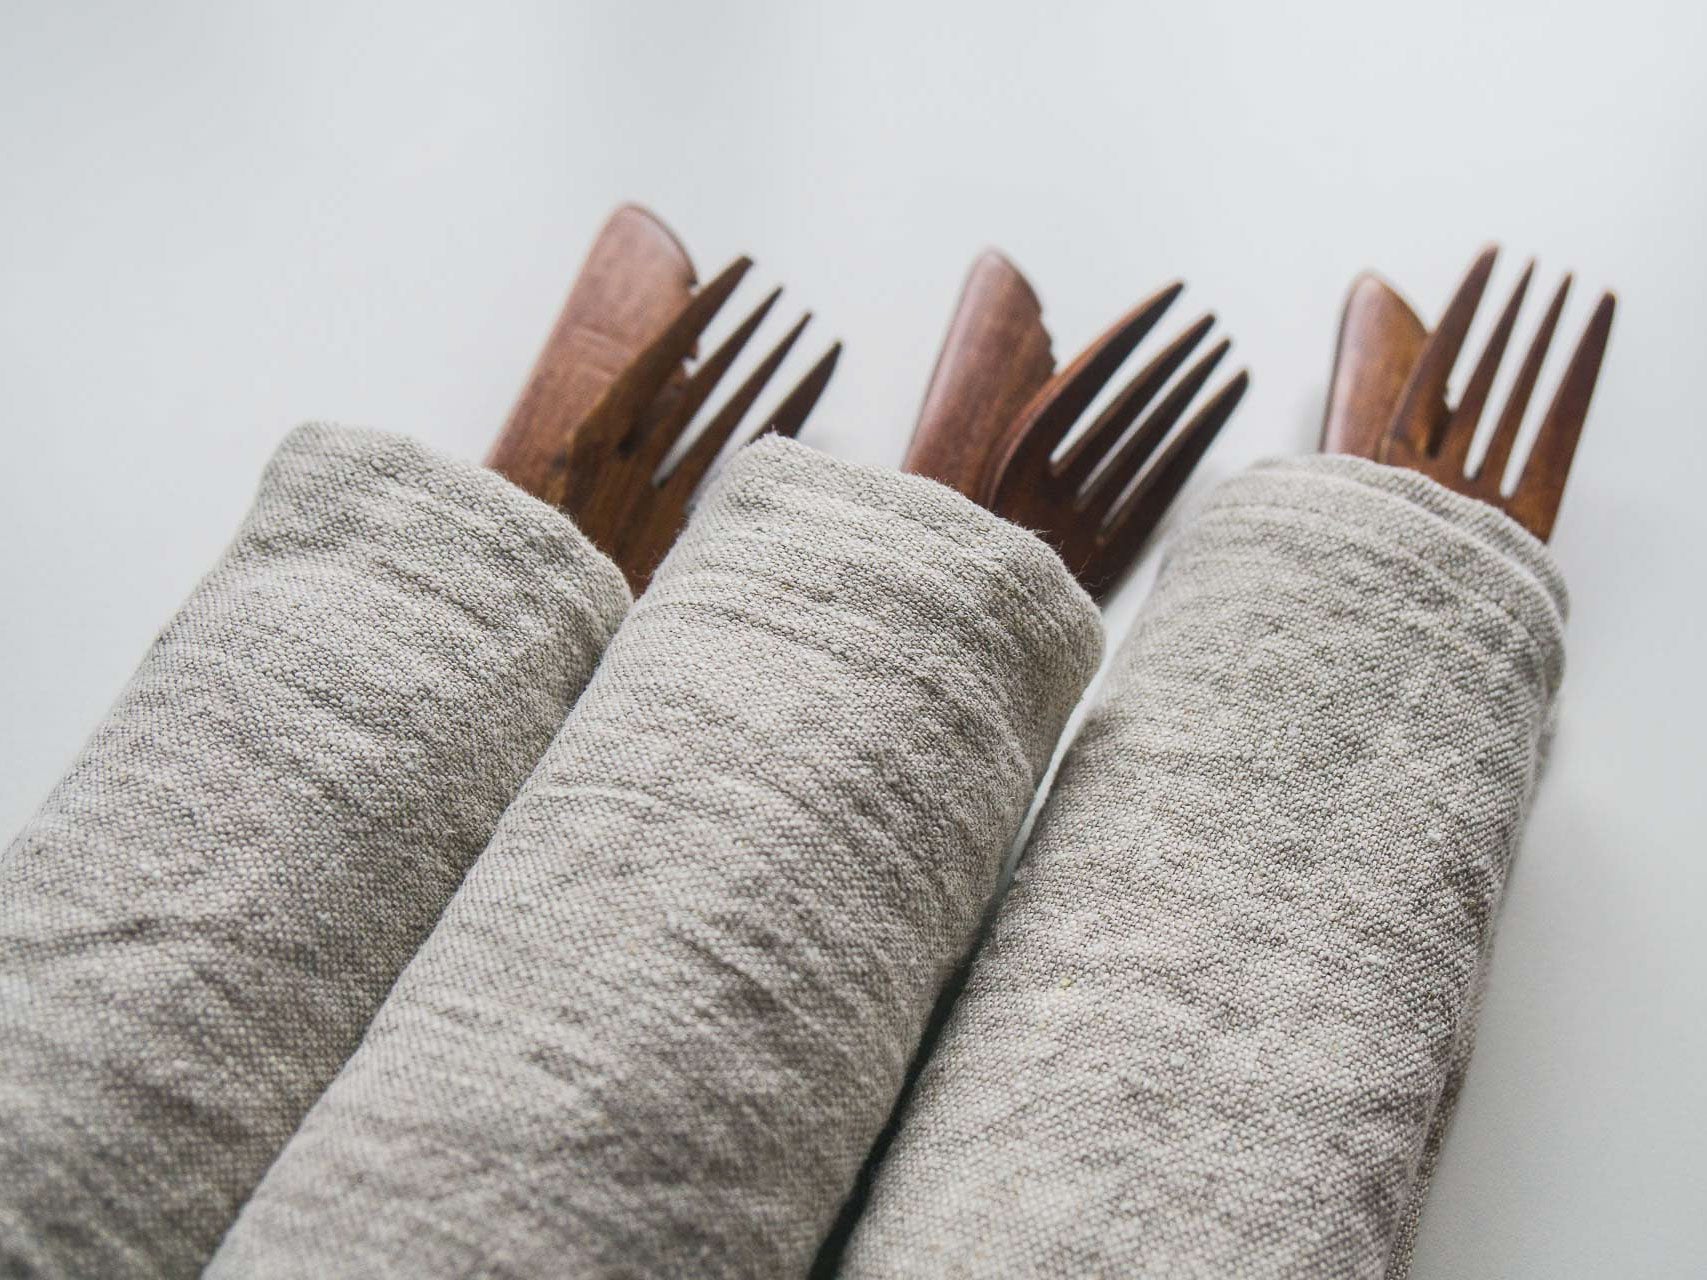 Wooden Cutlery rolled in Linen Napkins  Edit alt text